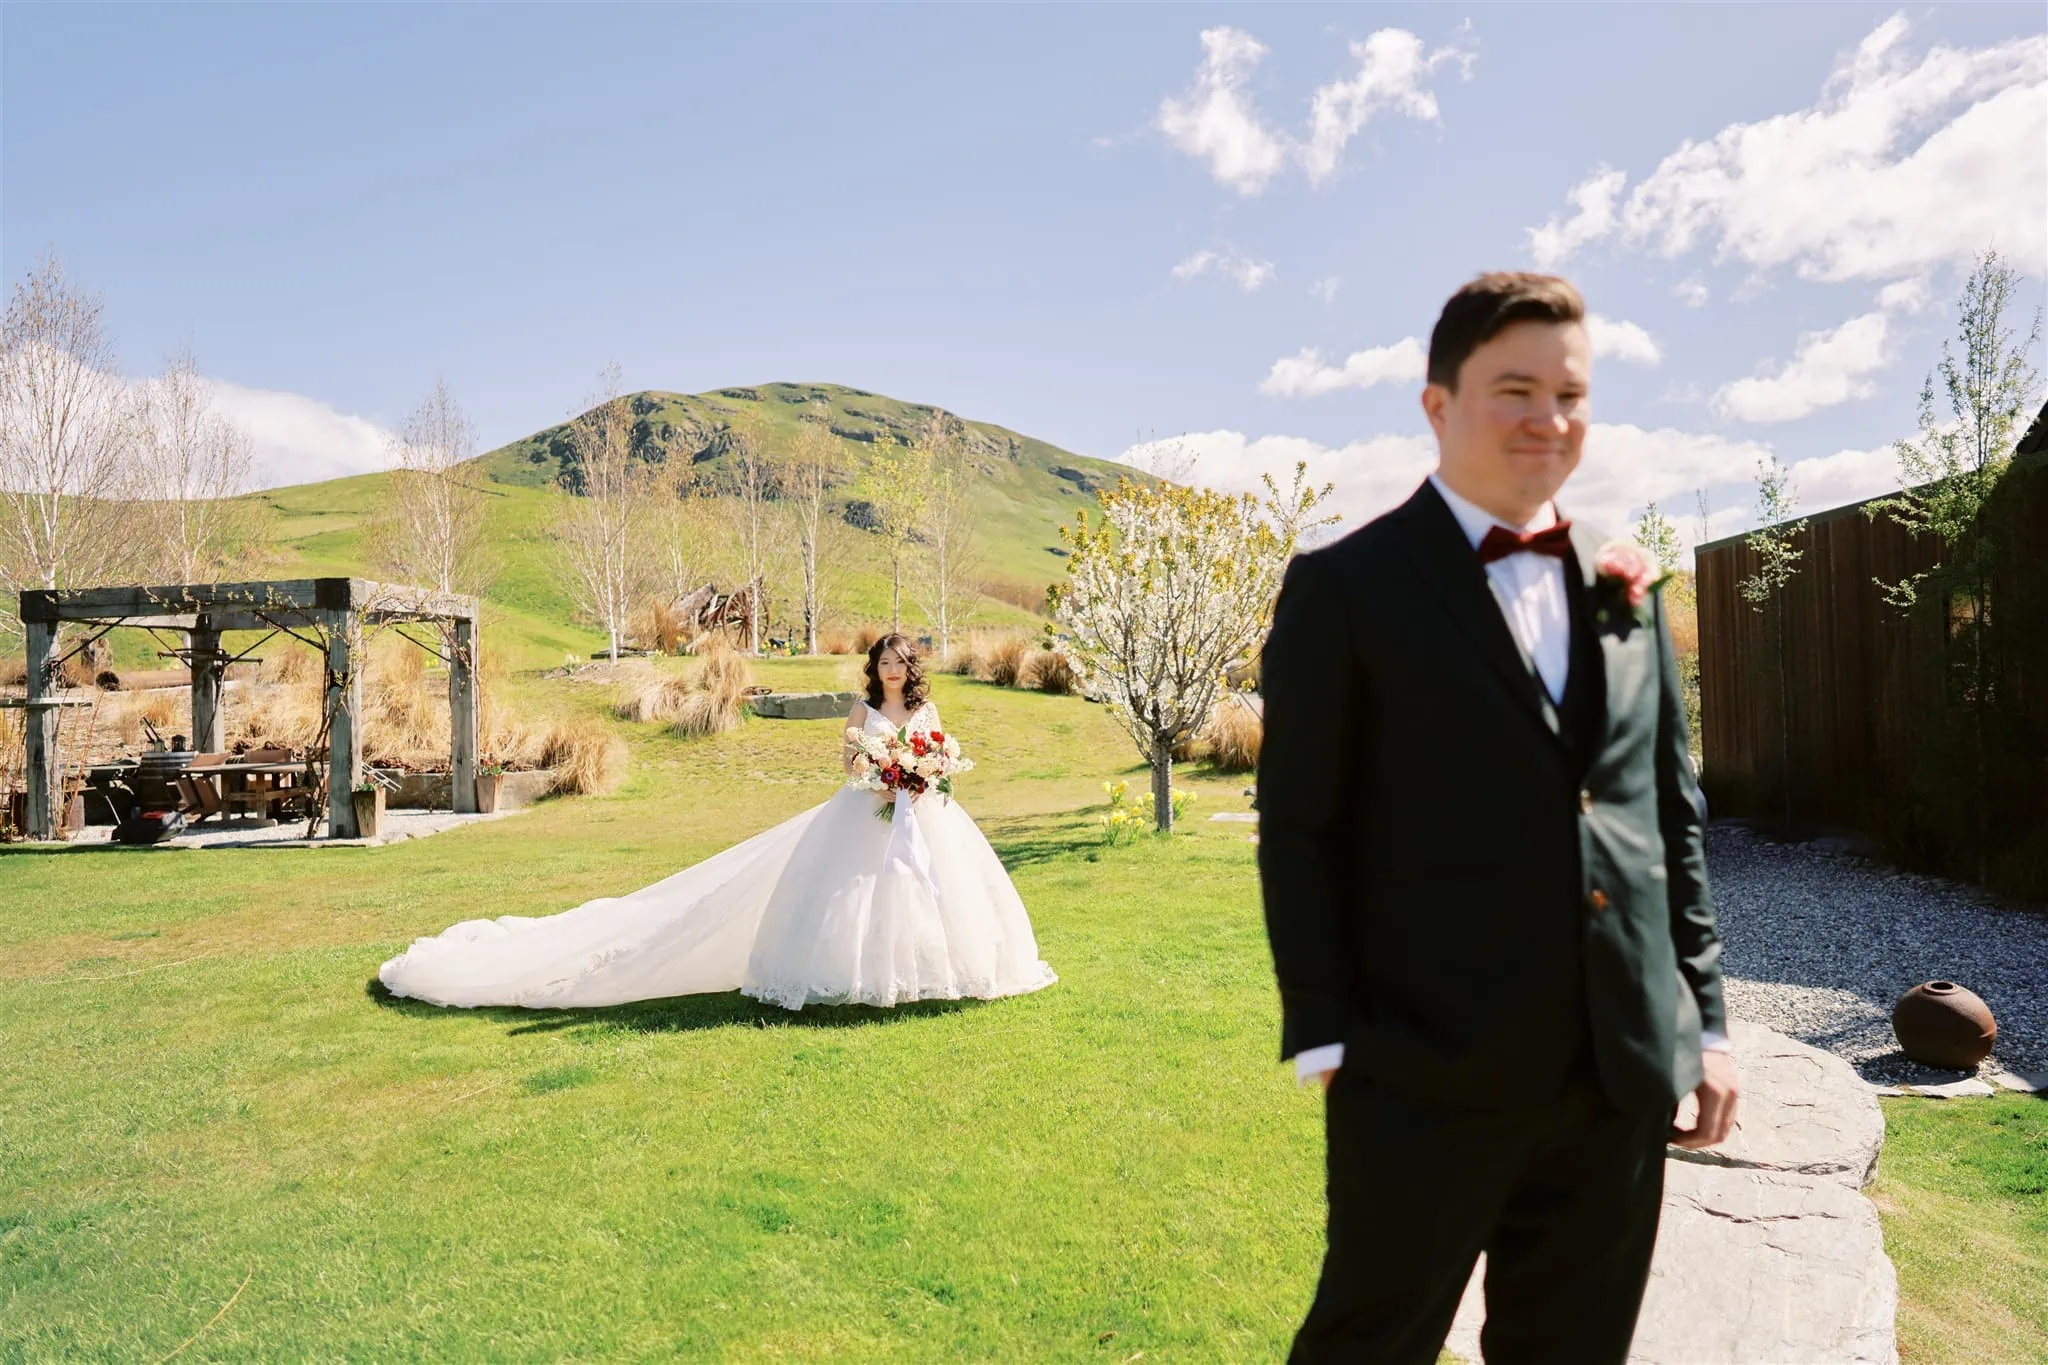 Queenstown Elopement Heli Wedding Photographer クイーンズタウン結婚式 | Michael and Alex, the bride and groom, standing in a grassy area near Roy's Peak.